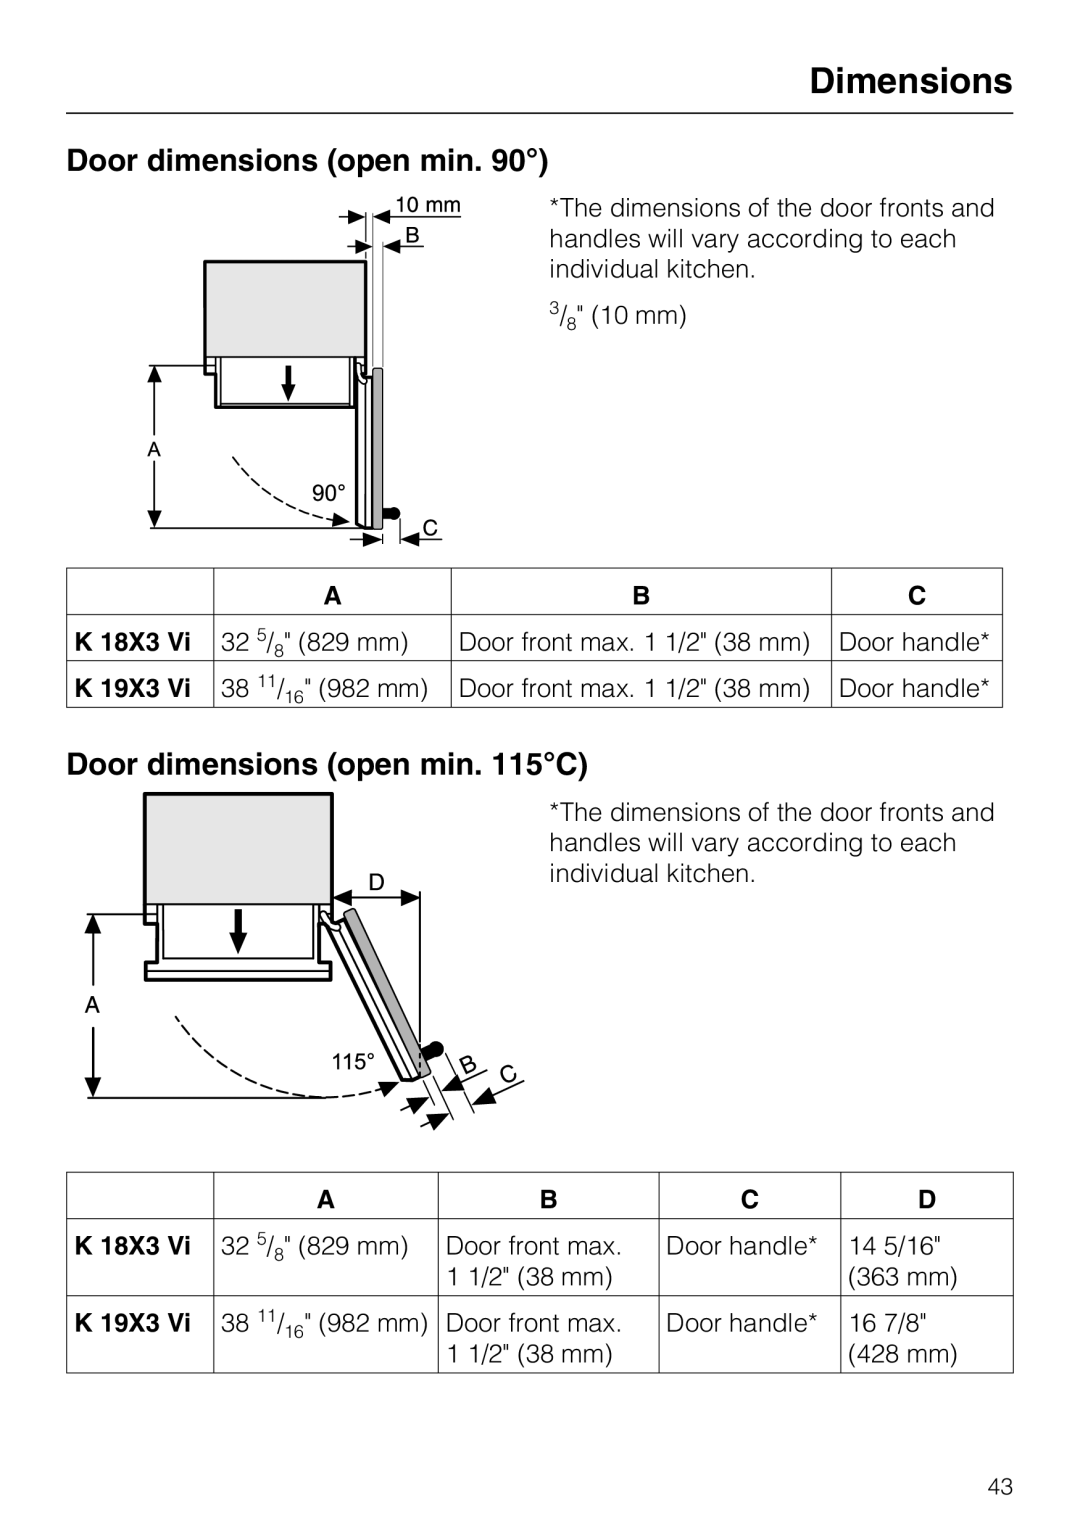 Miele 09 920 570 installation instructions Dimensions, Door dimensions open min. 115C 